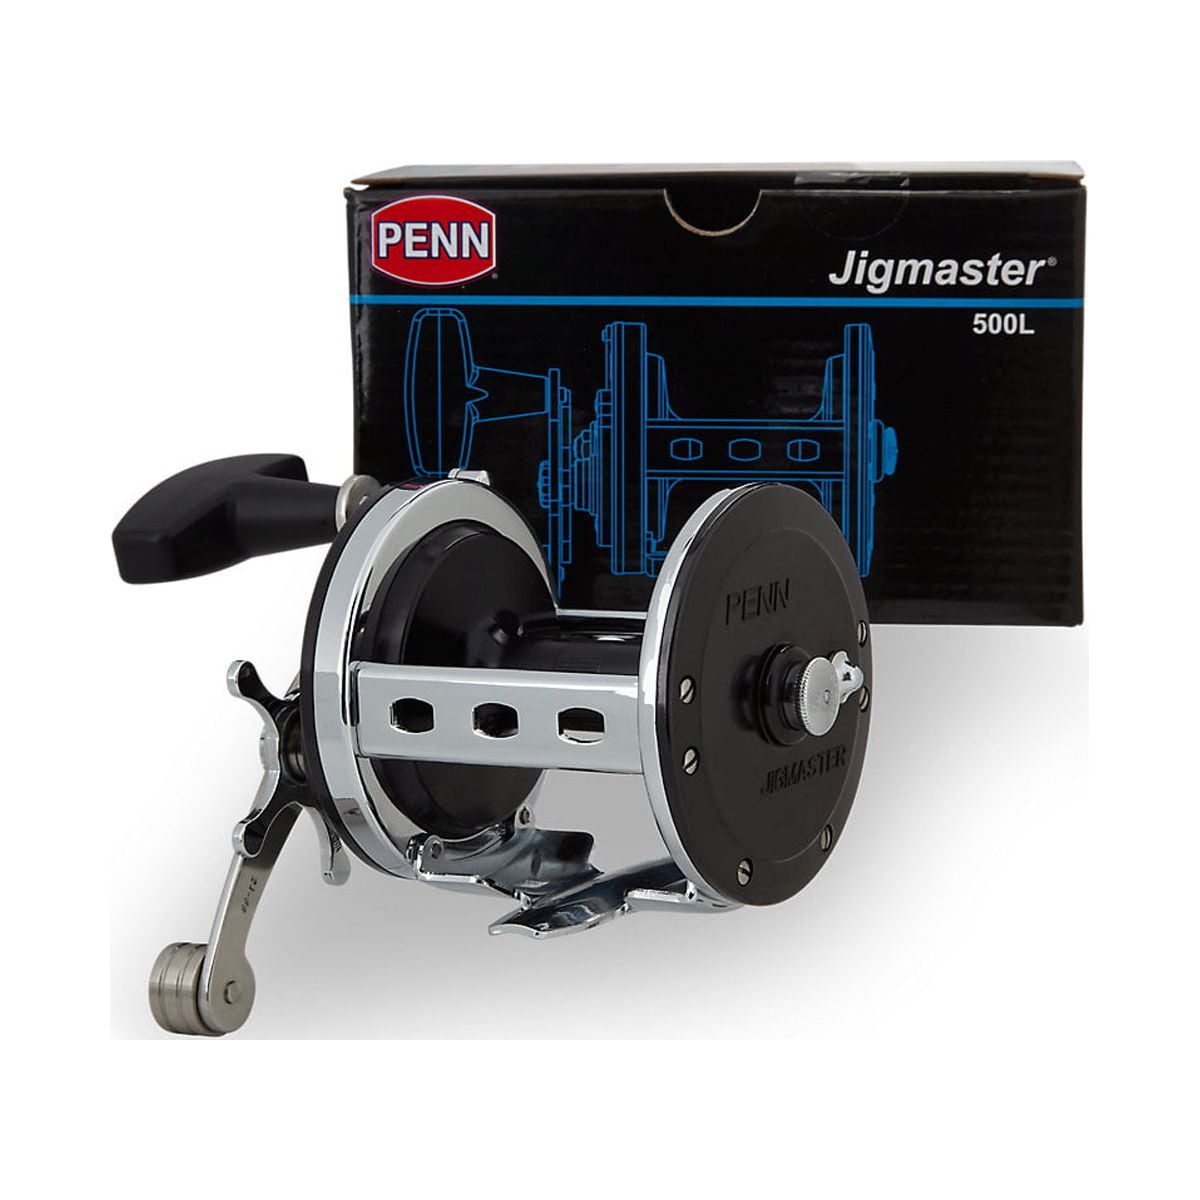 PENN Jigmaster Conventional Reel, Size 500